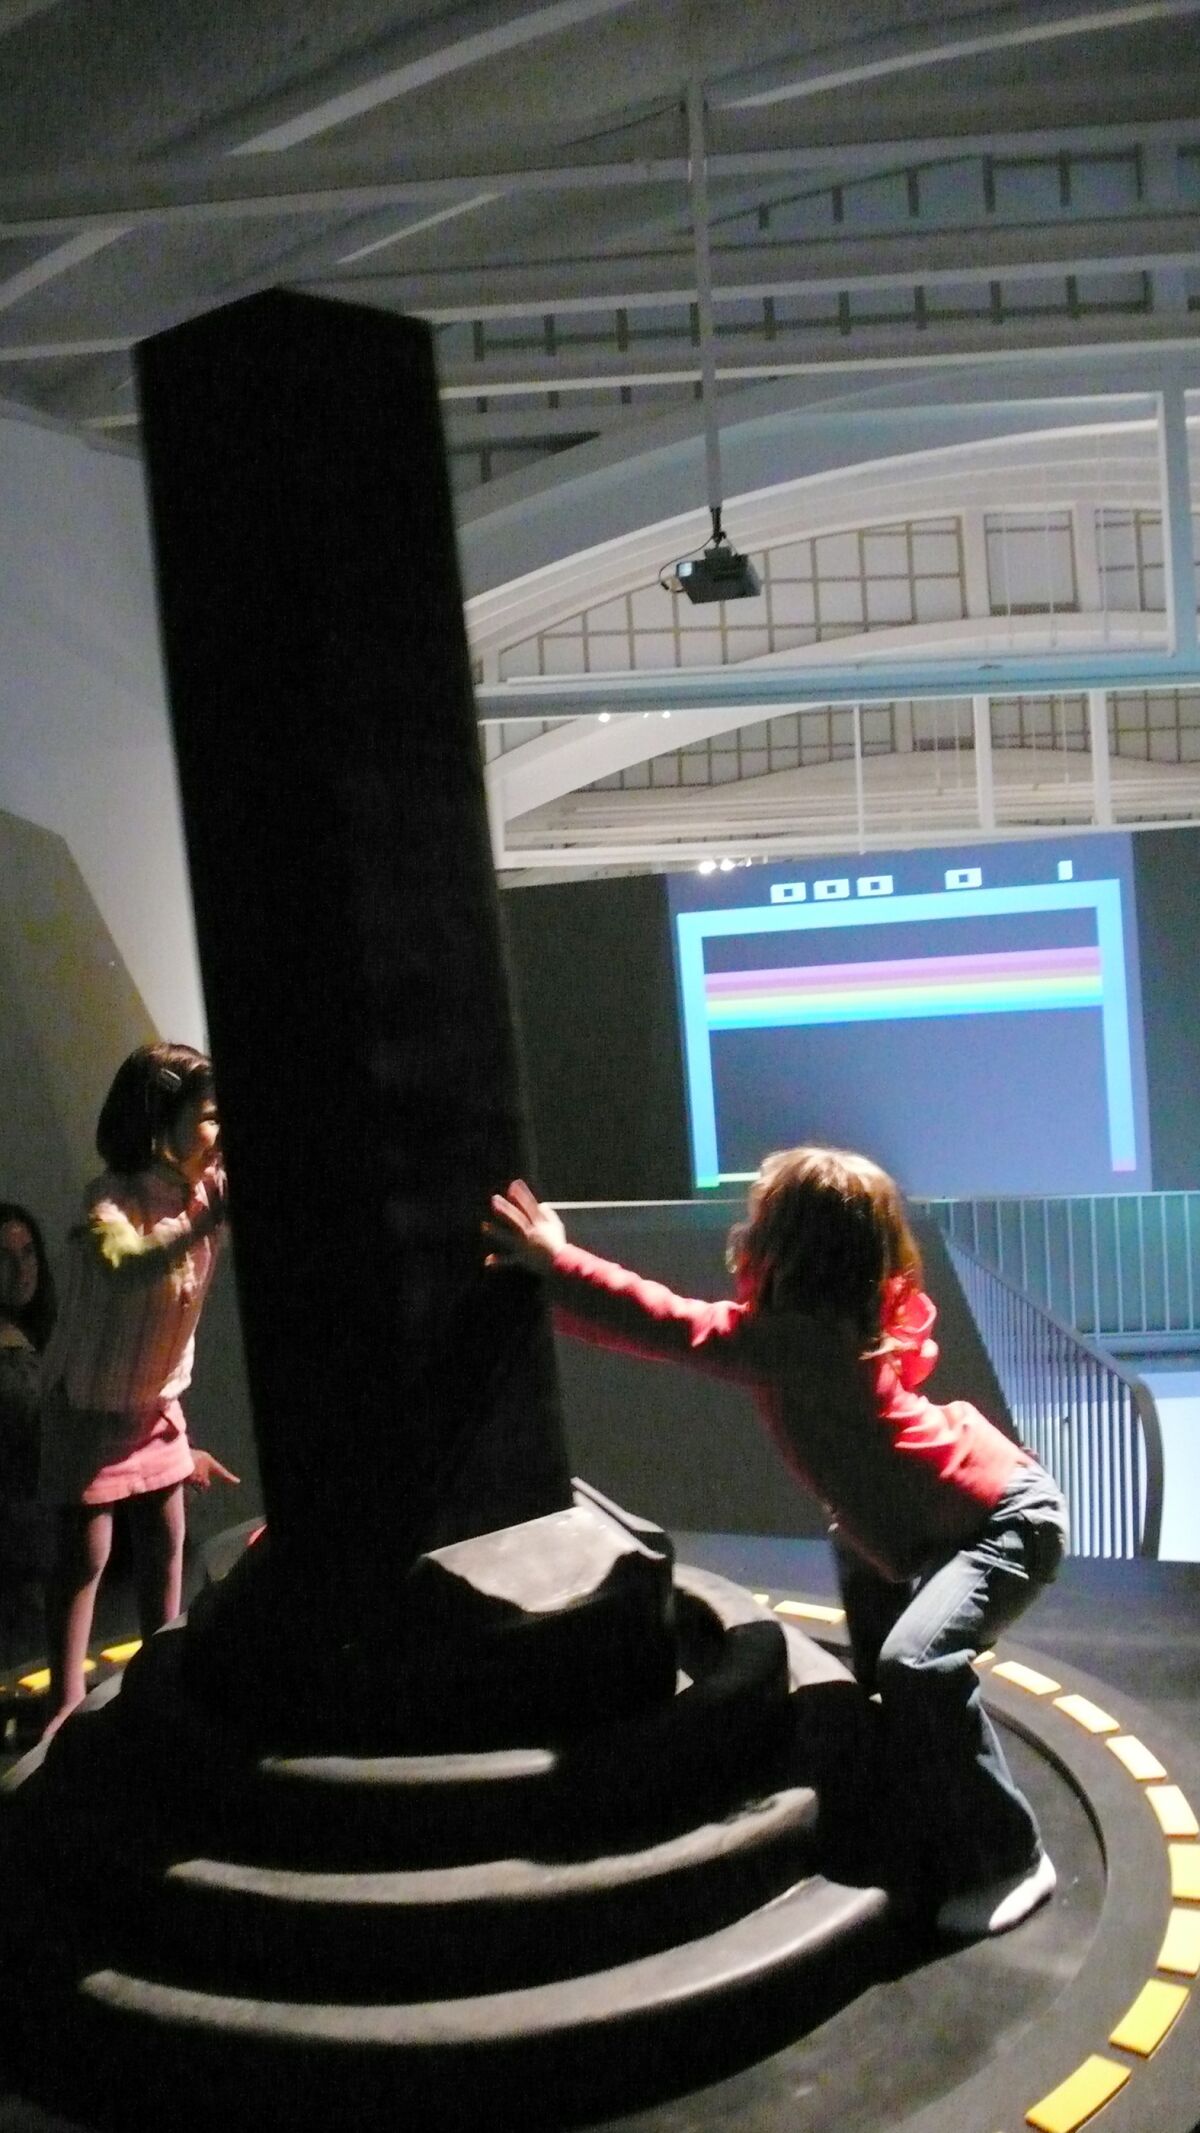 Two girls operate the Giant Joystick at LABoral Art and Industrial Creation Centre, March 31, 2007 in Asturias, Spain. The giant video game controller made of wood, rubber and steel by a Dartmouth College professor Mary Flanagan has made it into the Guinness World Records 2022 as the largest joystick. Flanagan created the controller in 2006 to celebrate her childhood experience of playing Atari 2600 video games. (Mary Flanagan via AP)